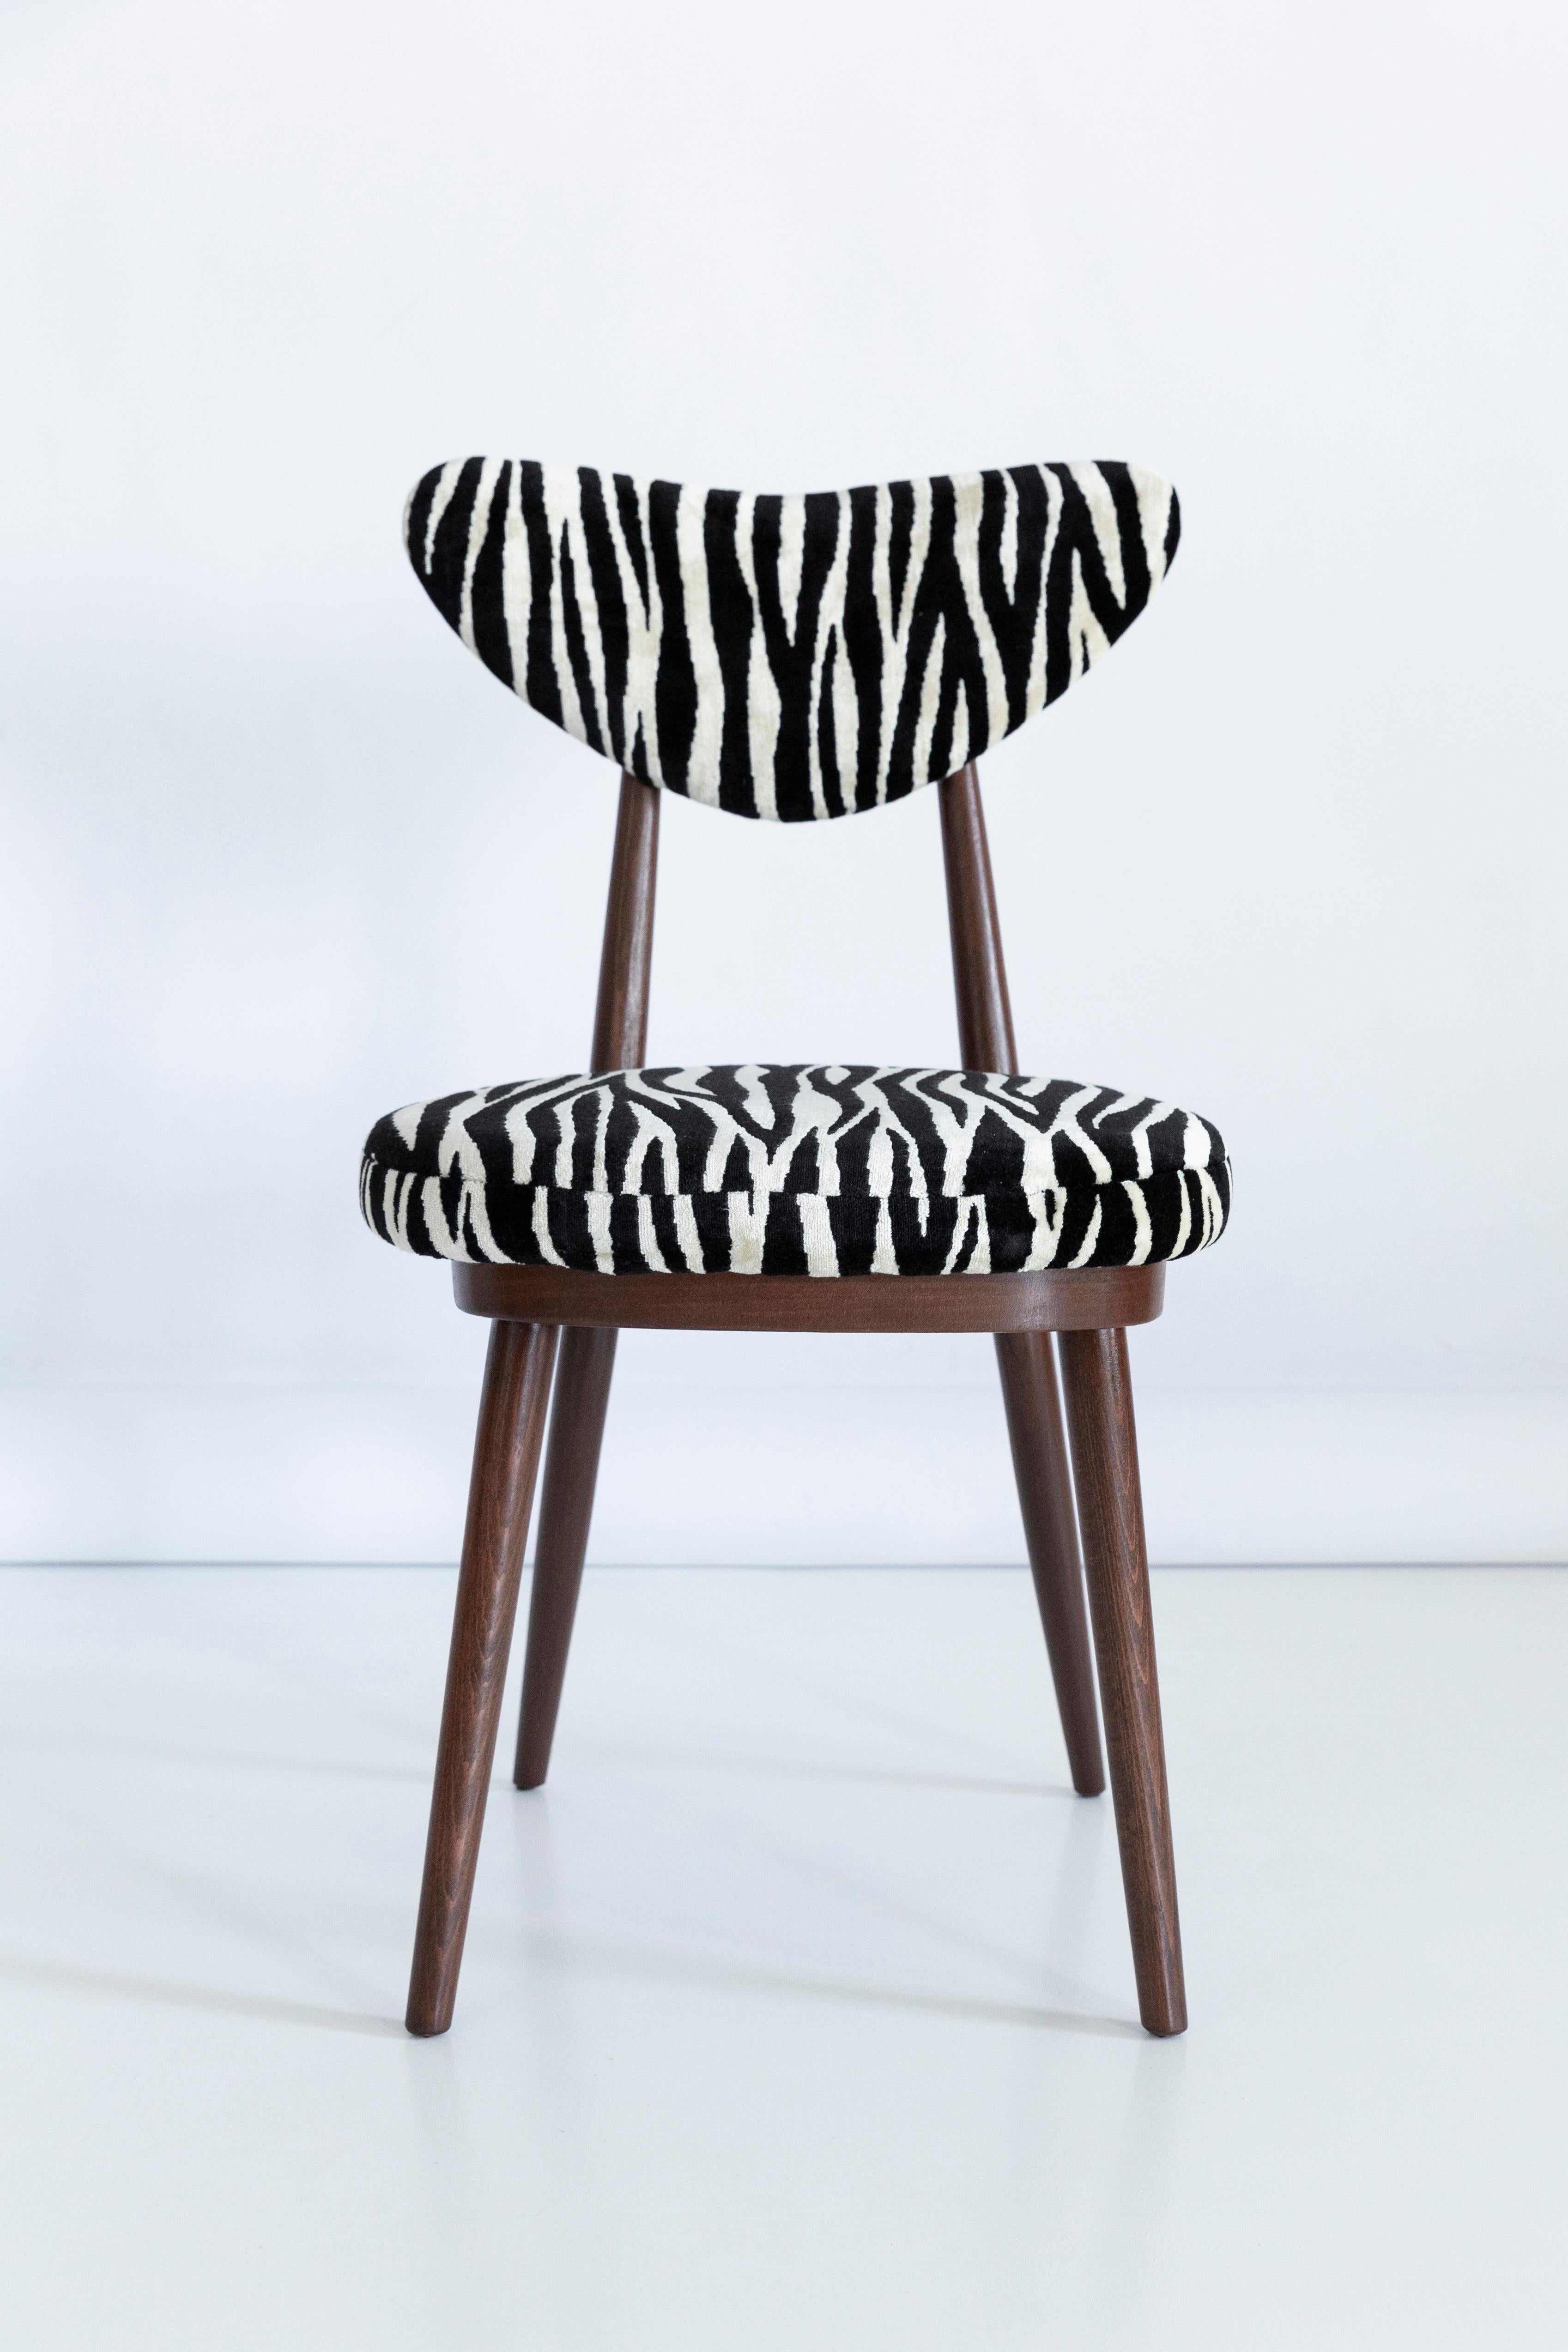 Set of Four Midcentury Zebra Black and White Heart Chairs, Poland, 1960s For Sale 7